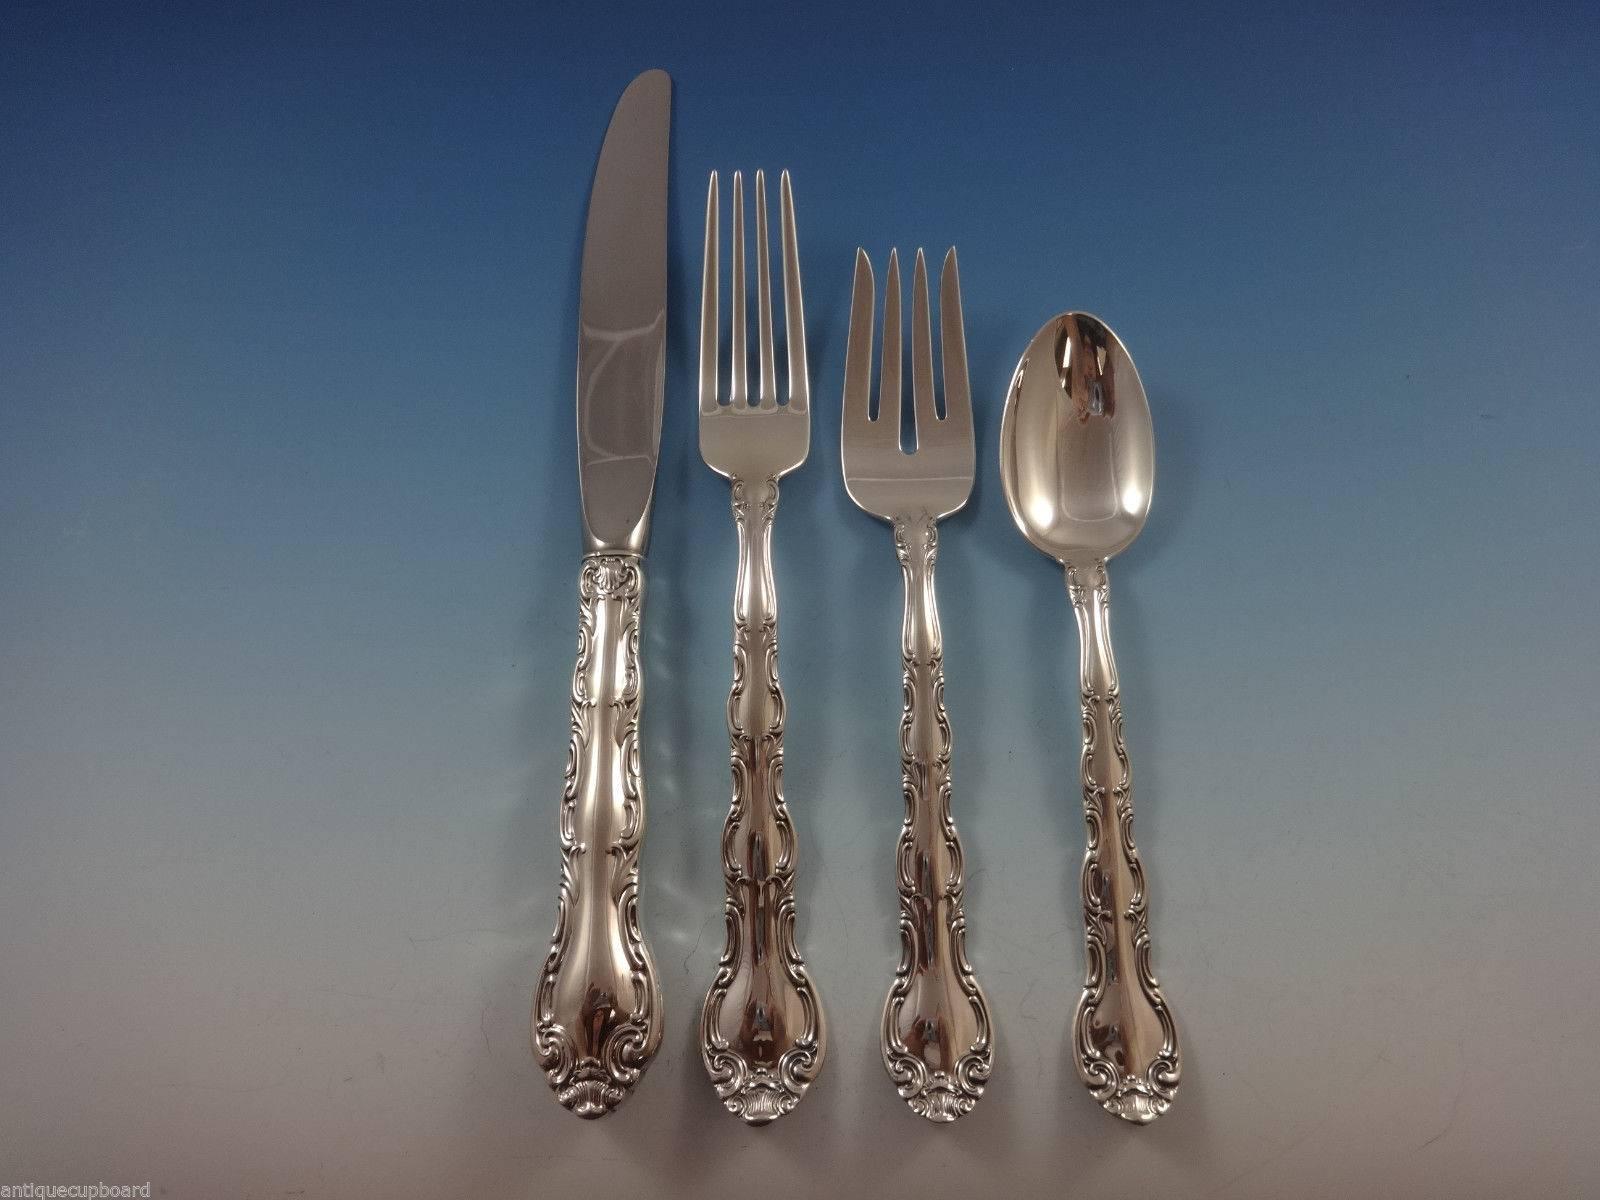 French Scroll by Alvin Sterling Silver Flatware Set - 34 Pieces. This set includes: 

8 KNIVES, 8 7/8